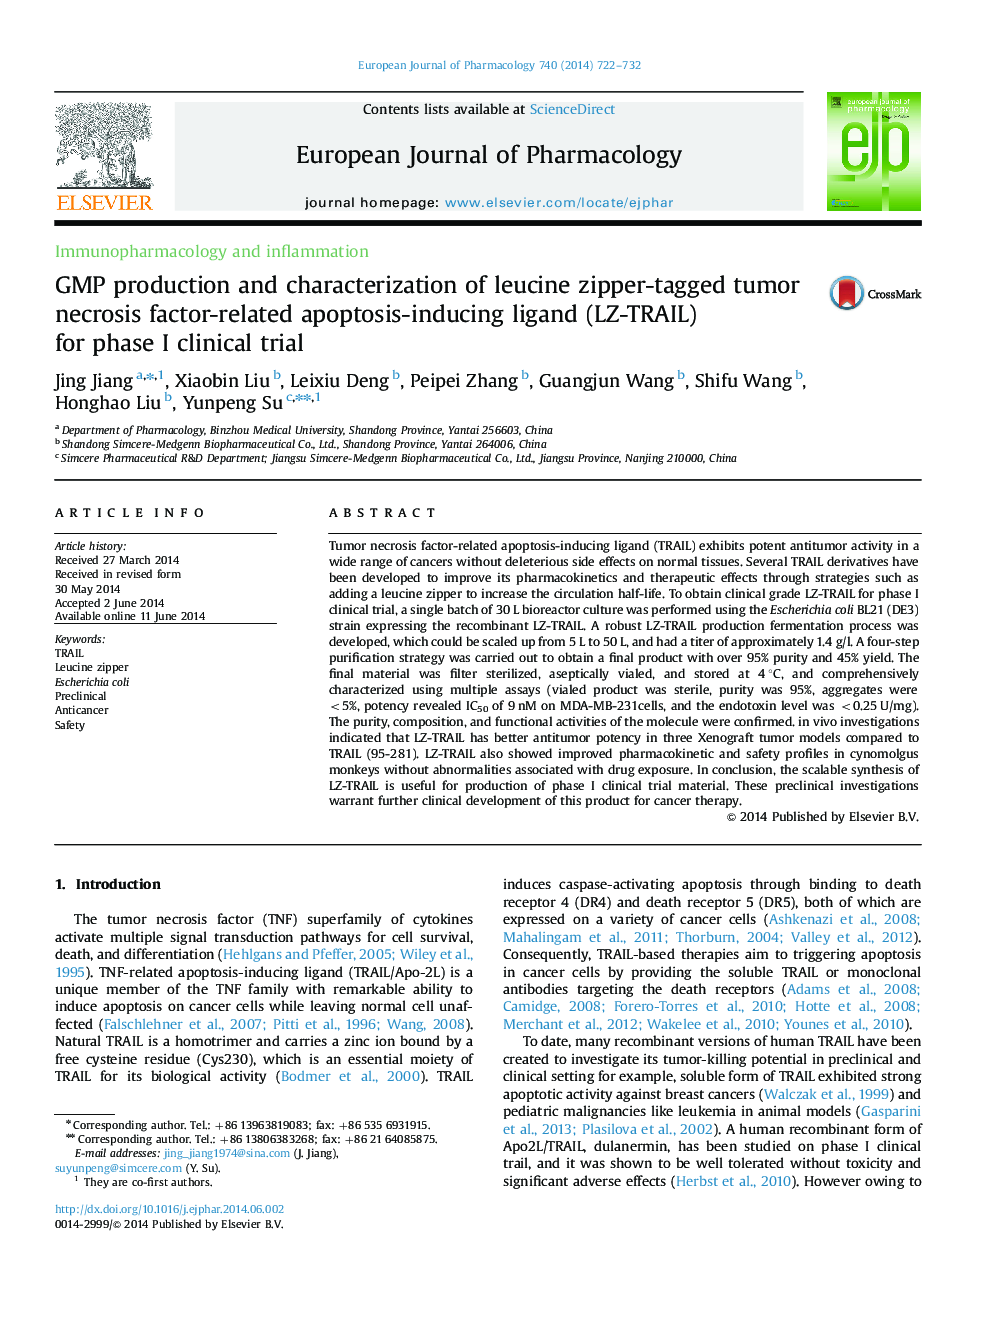 GMP production and characterization of leucine zipper-tagged tumor necrosis factor-related apoptosis-inducing ligand (LZ-TRAIL) for phase I clinical trial